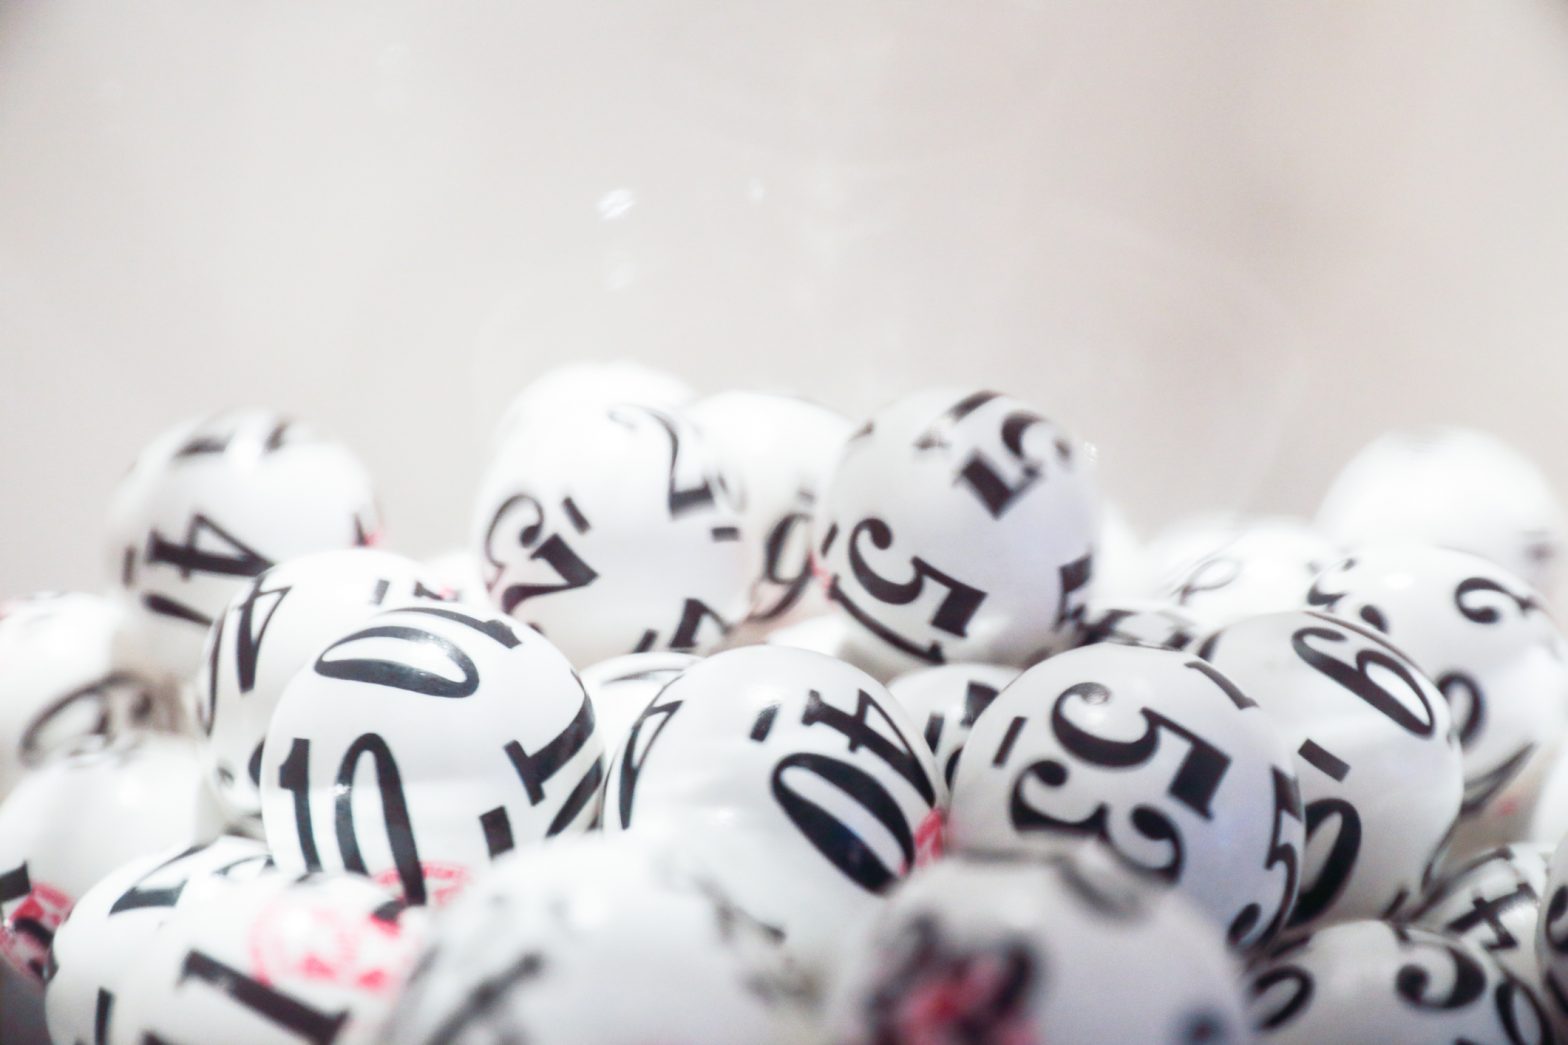 Lottery balls showing lottery numbers